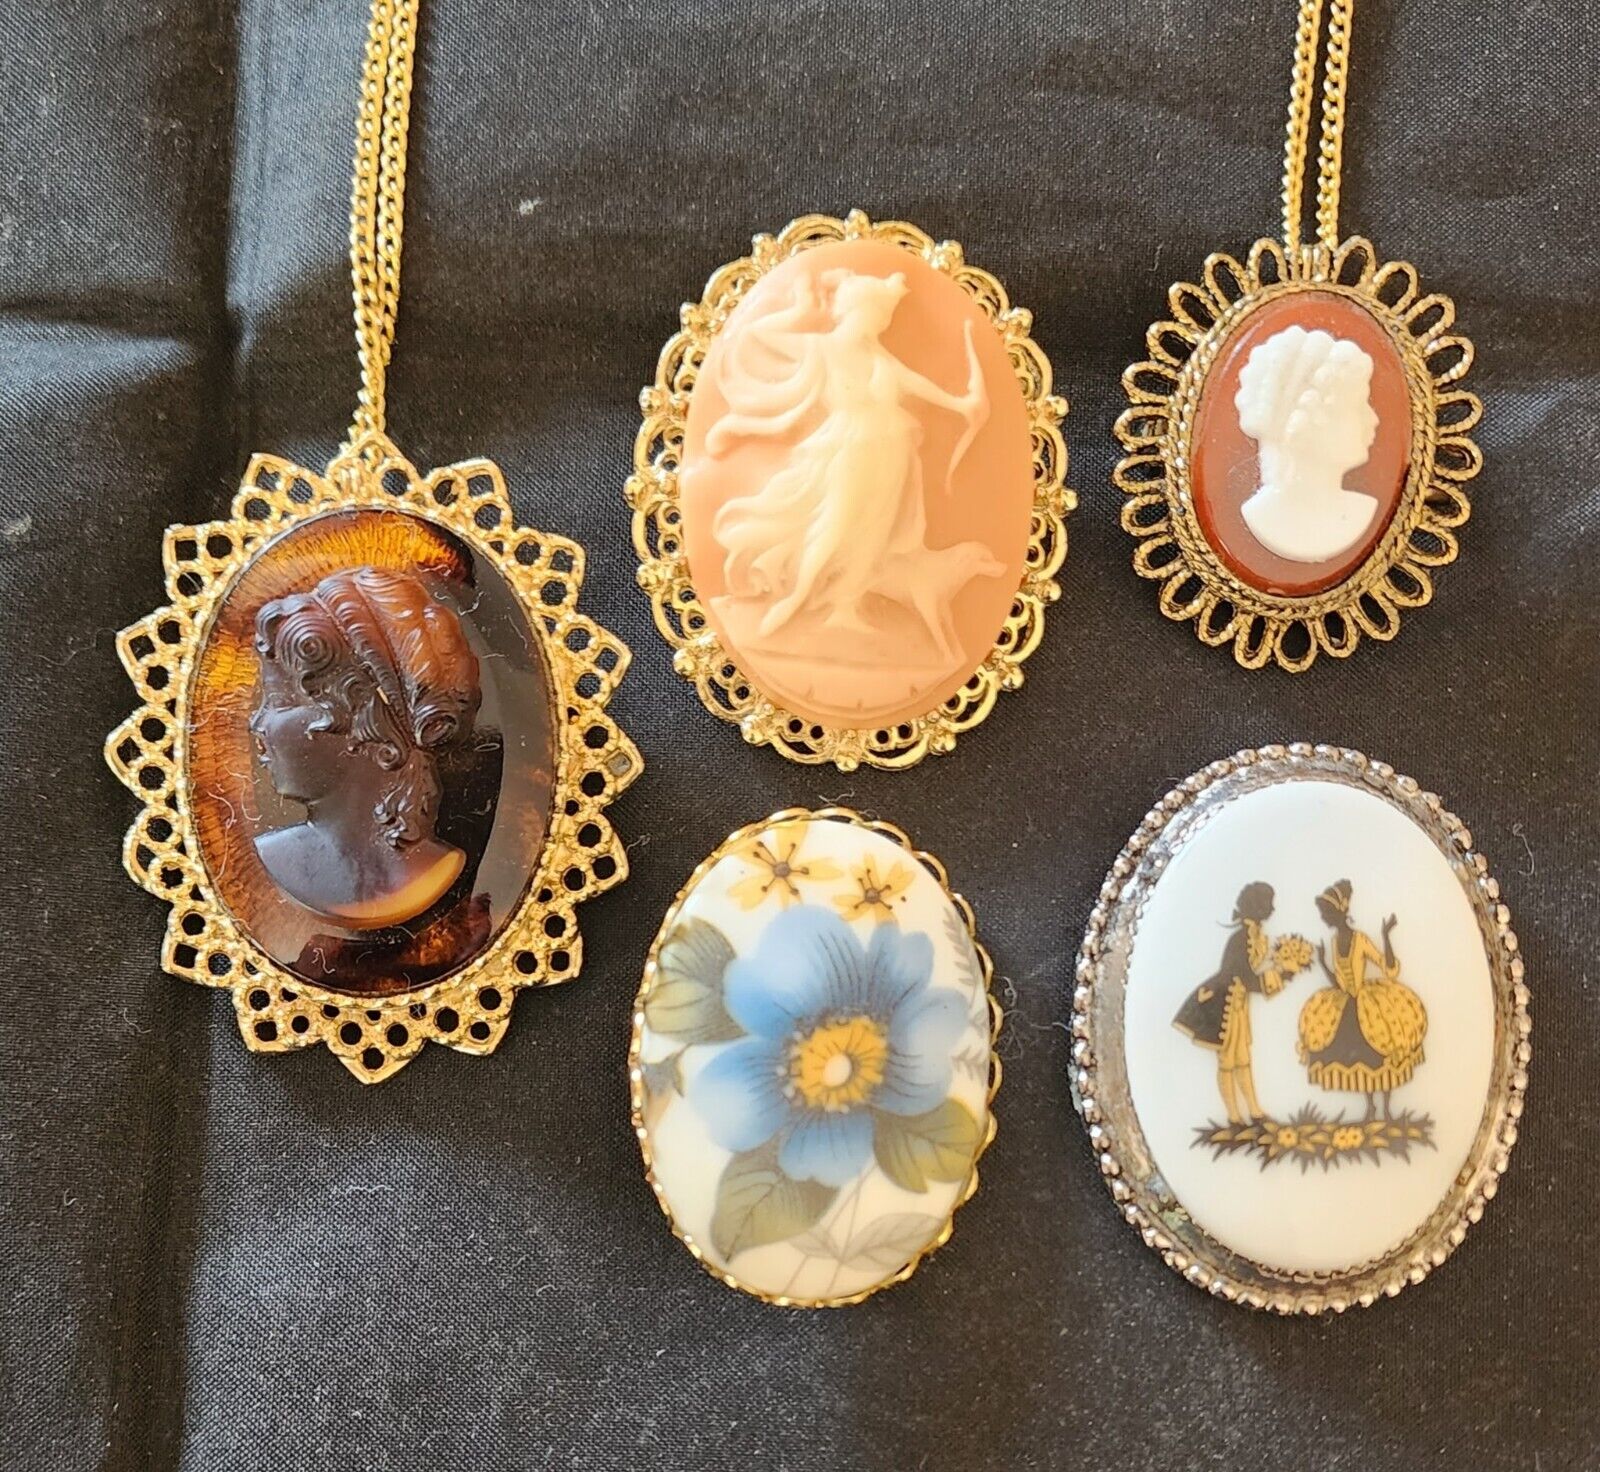 Lot of 5 Vintage Lady Head Cameo Quality Pin Brooch Beautiful Costume Jewelry